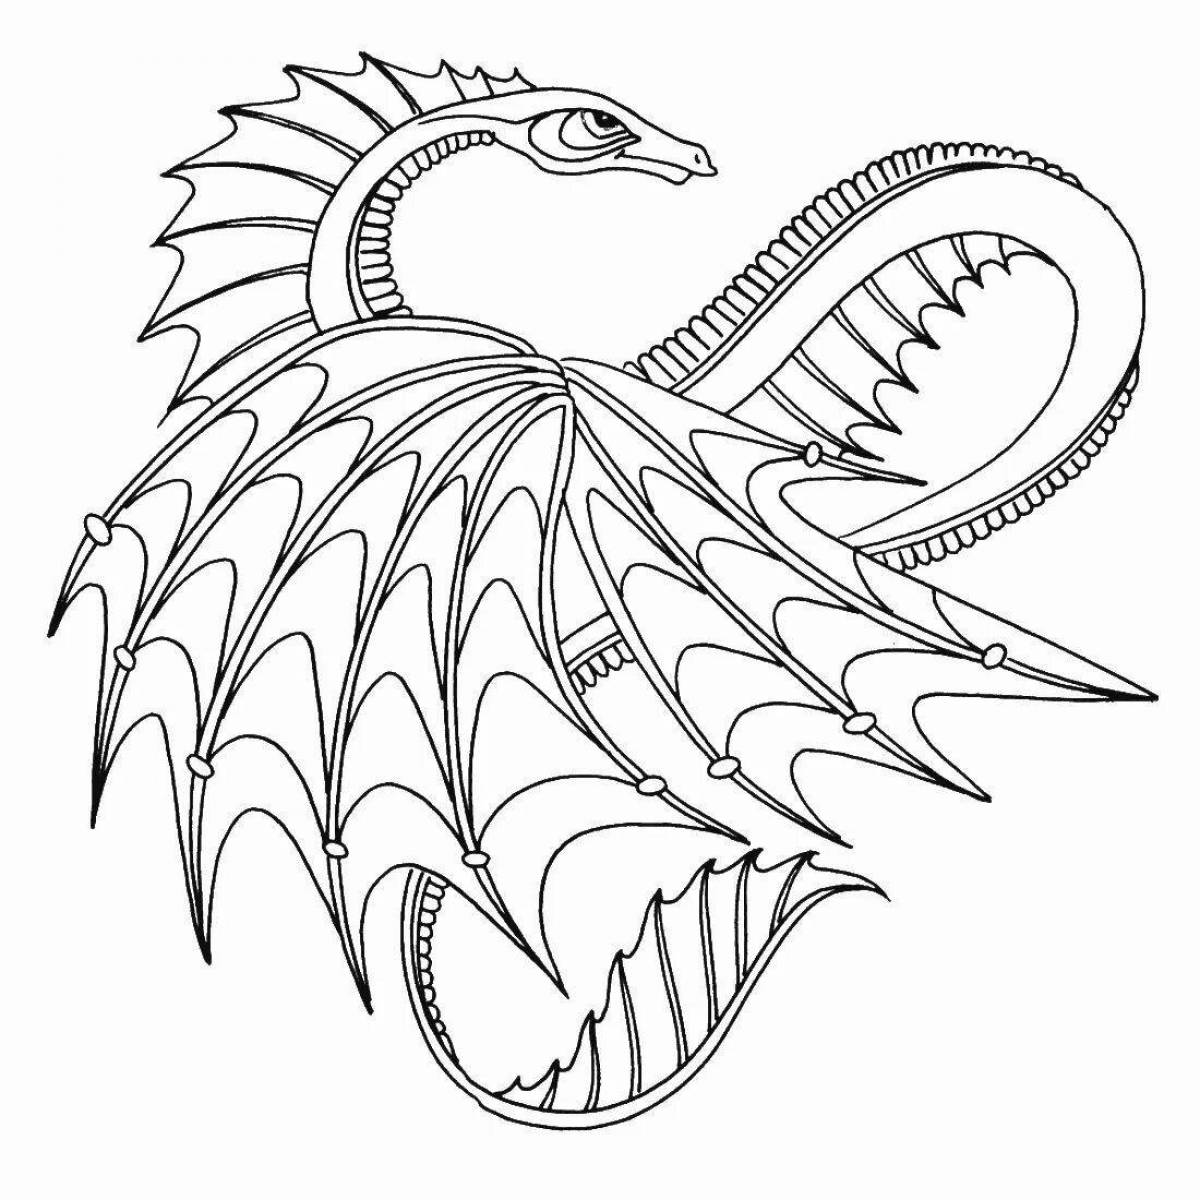 Exalted water dragon coloring page